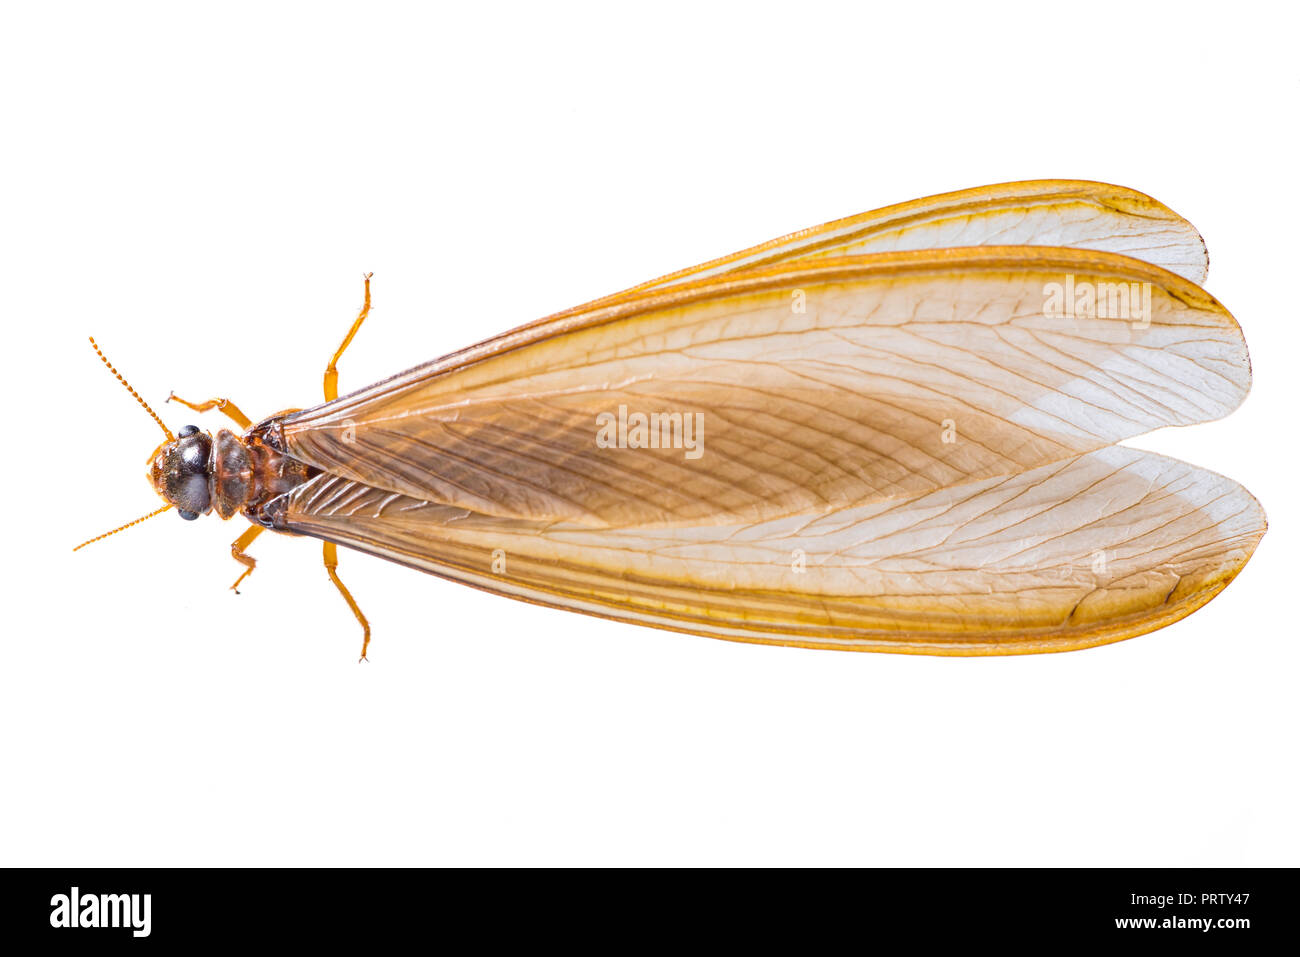 A flying termite or Alates isolated on white background. Stock Photo